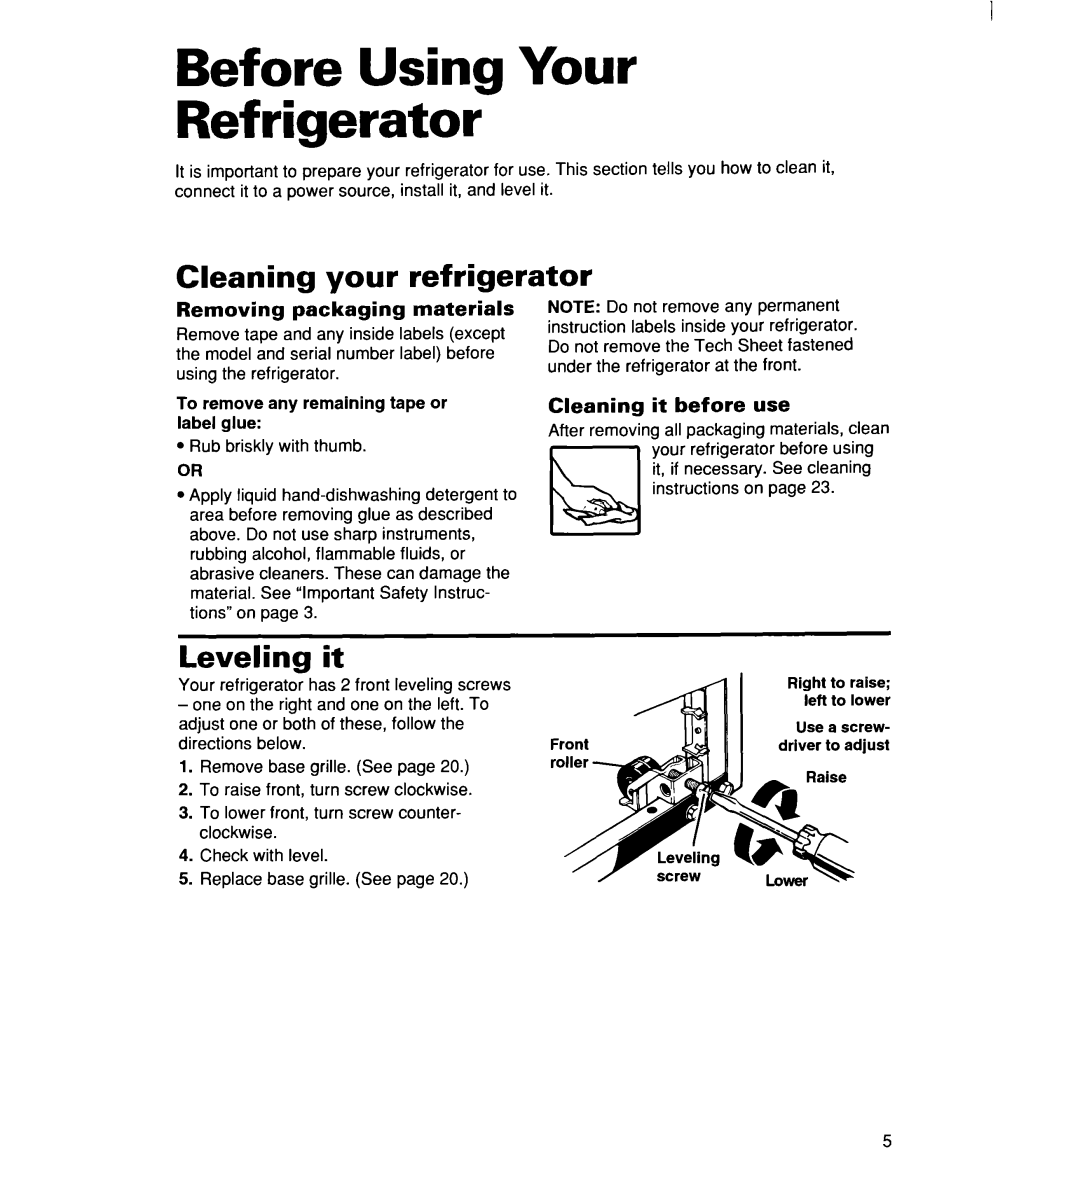 Whirlpool 2194182 Before Using Your Refrigerator, Cleaning your refrigerator, Leveling it, Removing packaging materials 